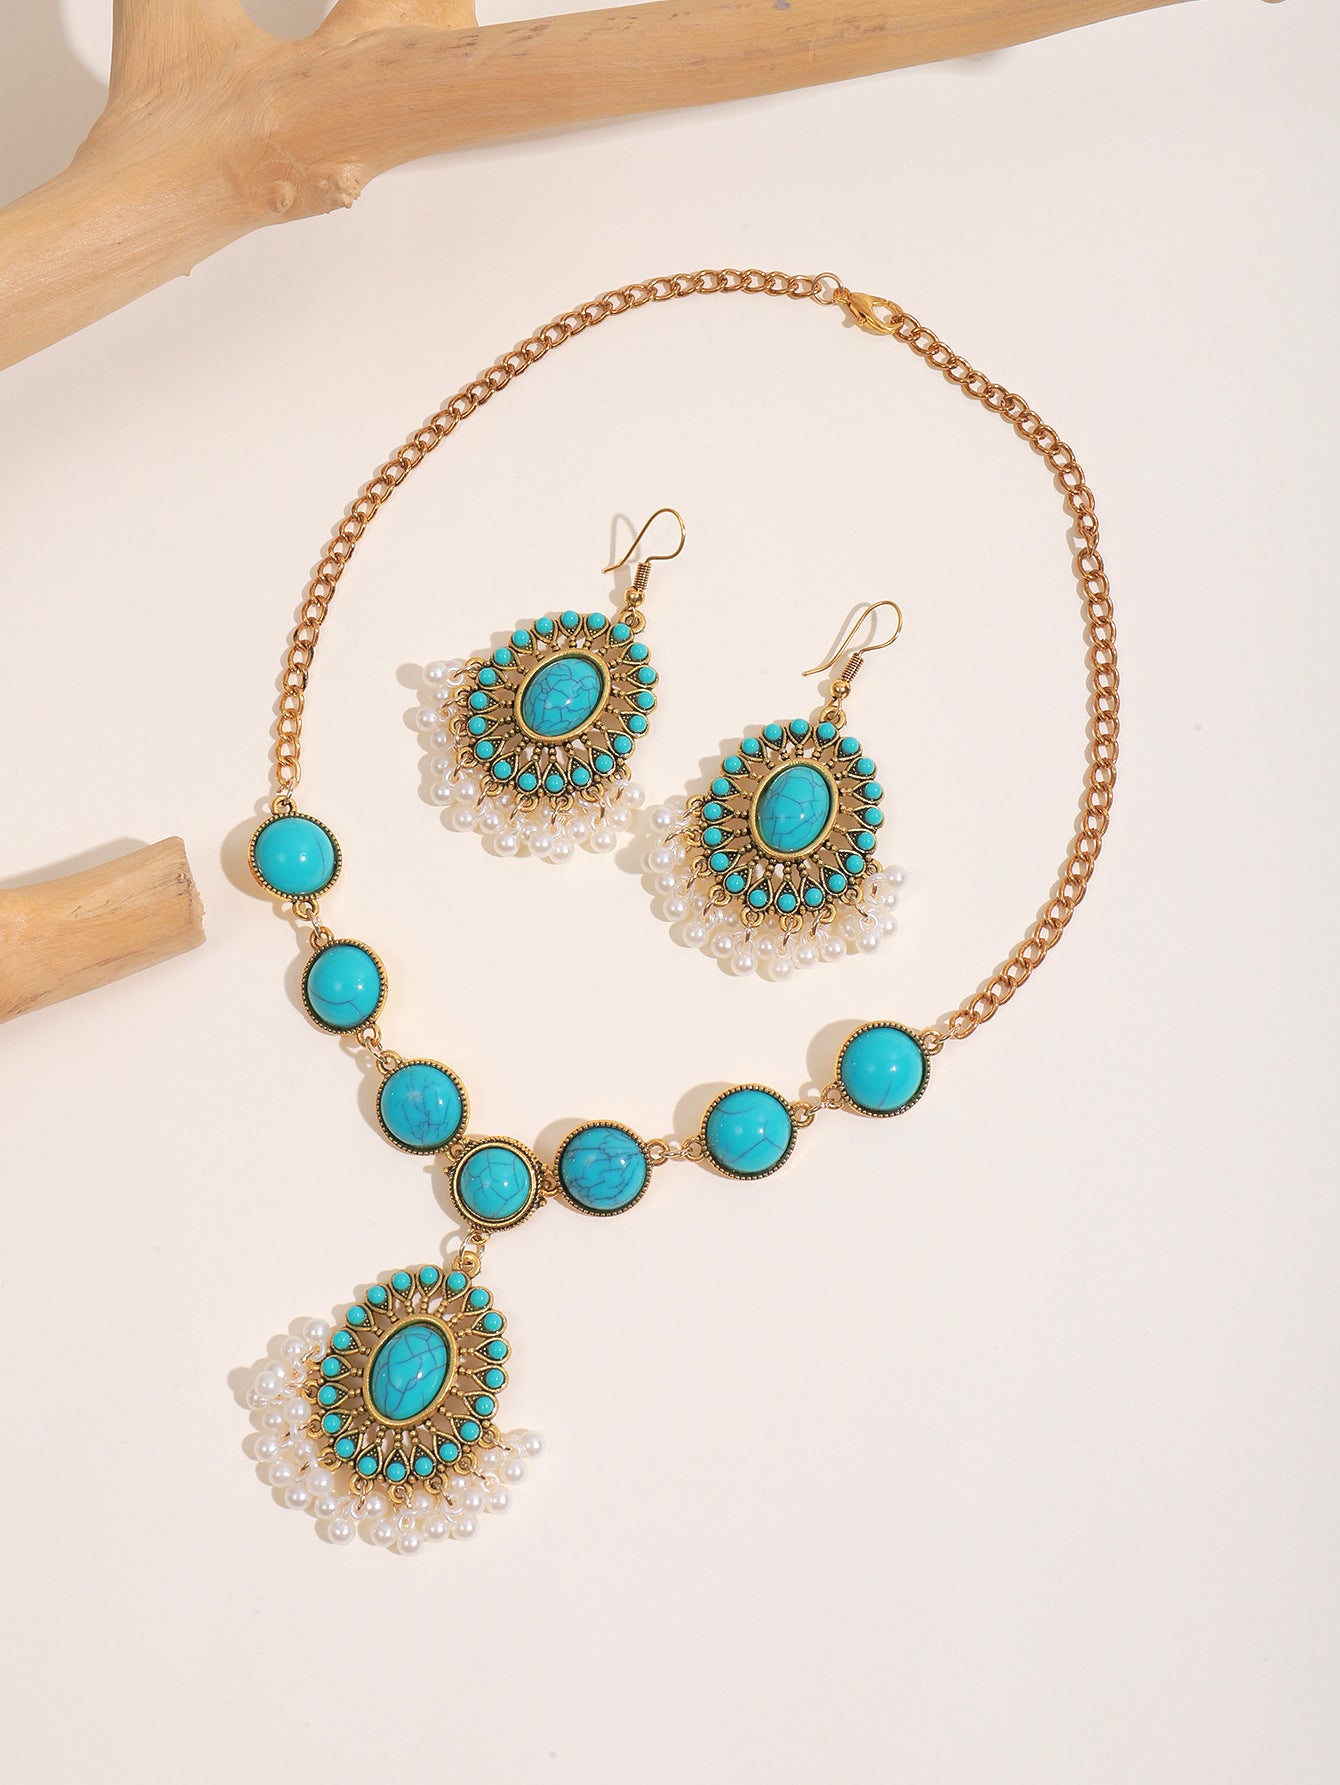 Savanna Rhythms Ethnic Turquoise Necklace with Tassel Pendant and Earrings